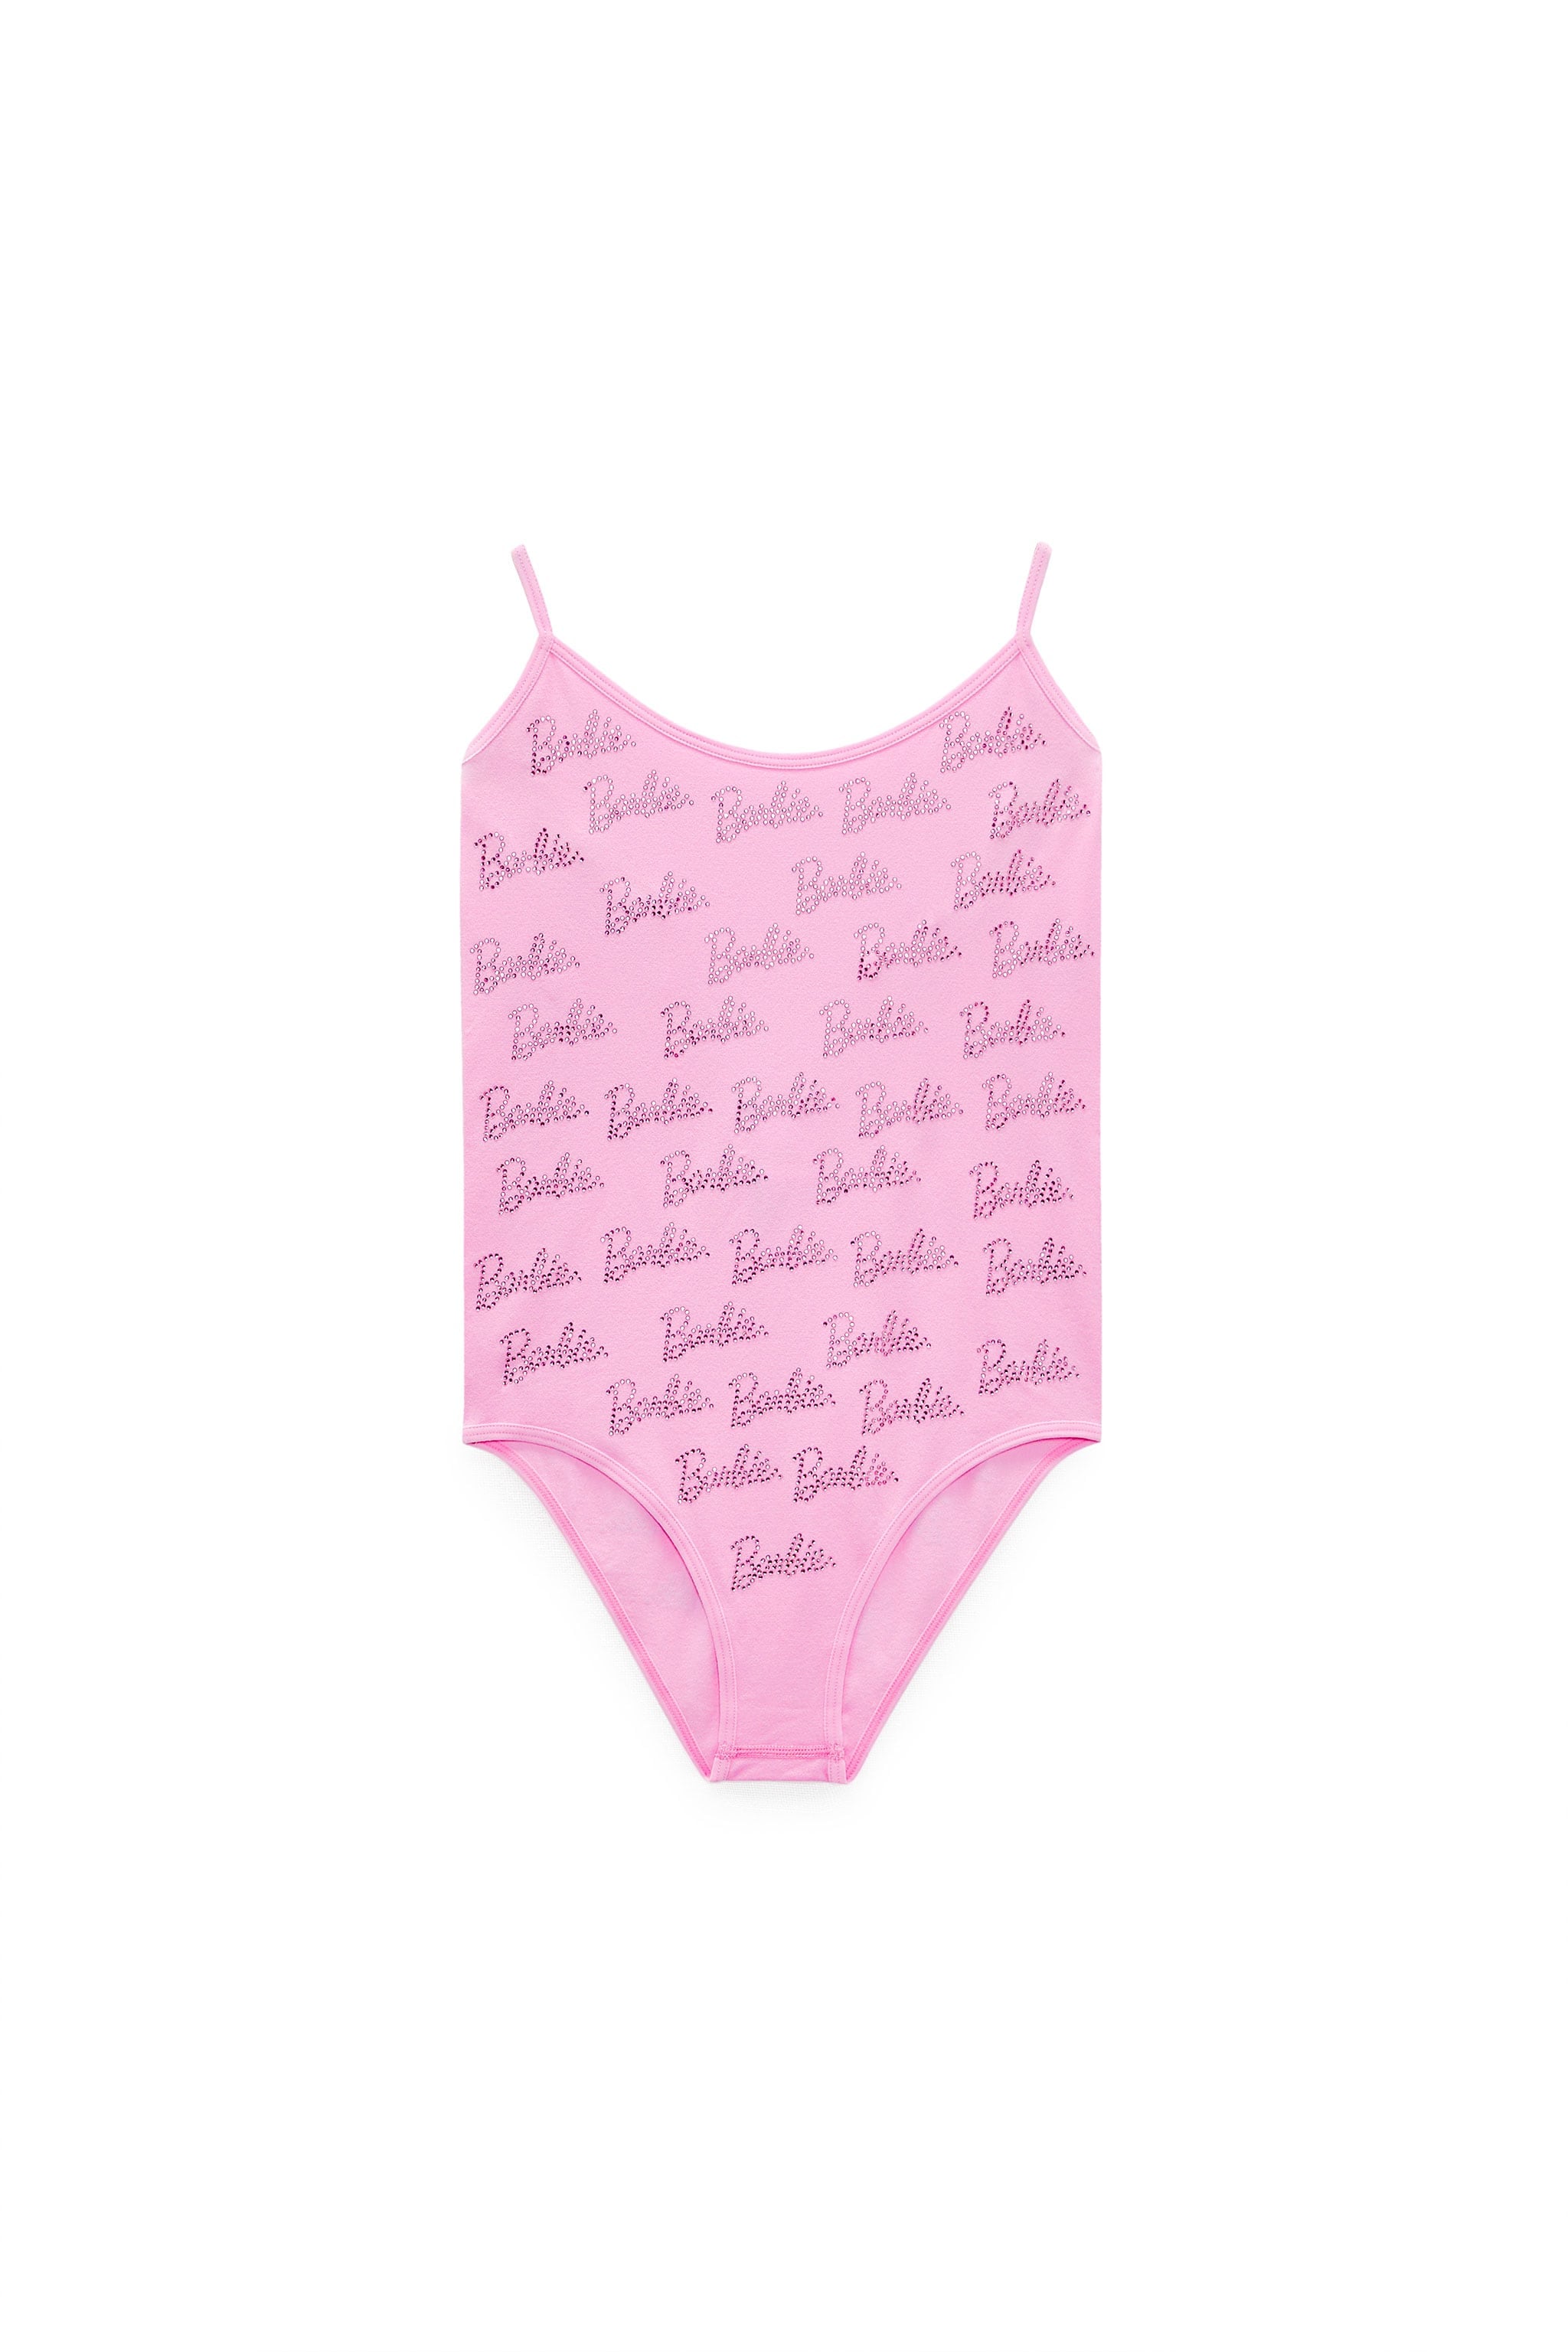 Barbie Merch Bodysuit  If You Can't Get Kenough of the Barbie